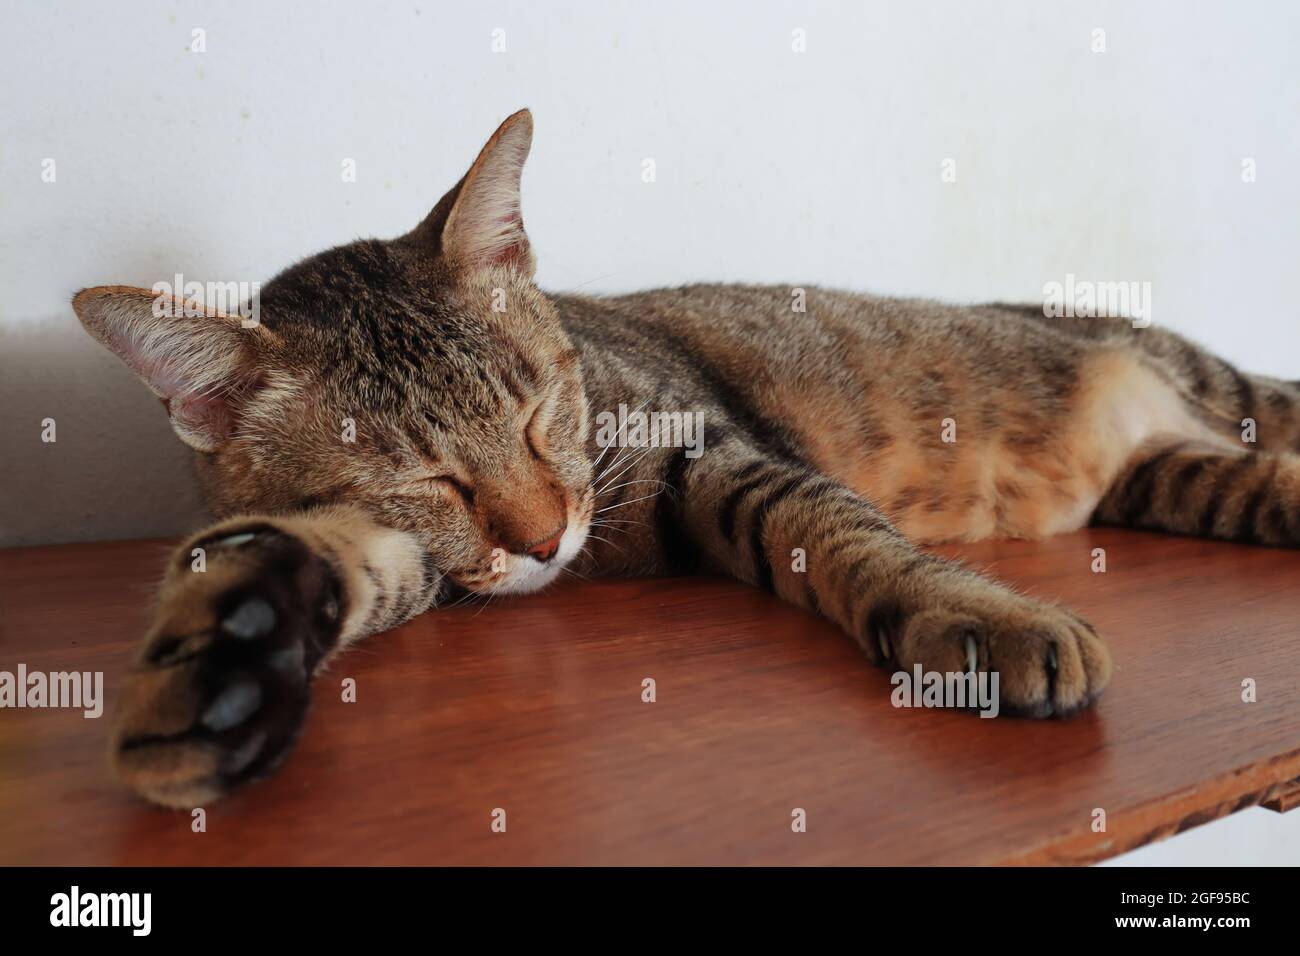 Close portrait of adorable male tabby cat relaxing and sleeping comfortably on the shelf. Stock Photo